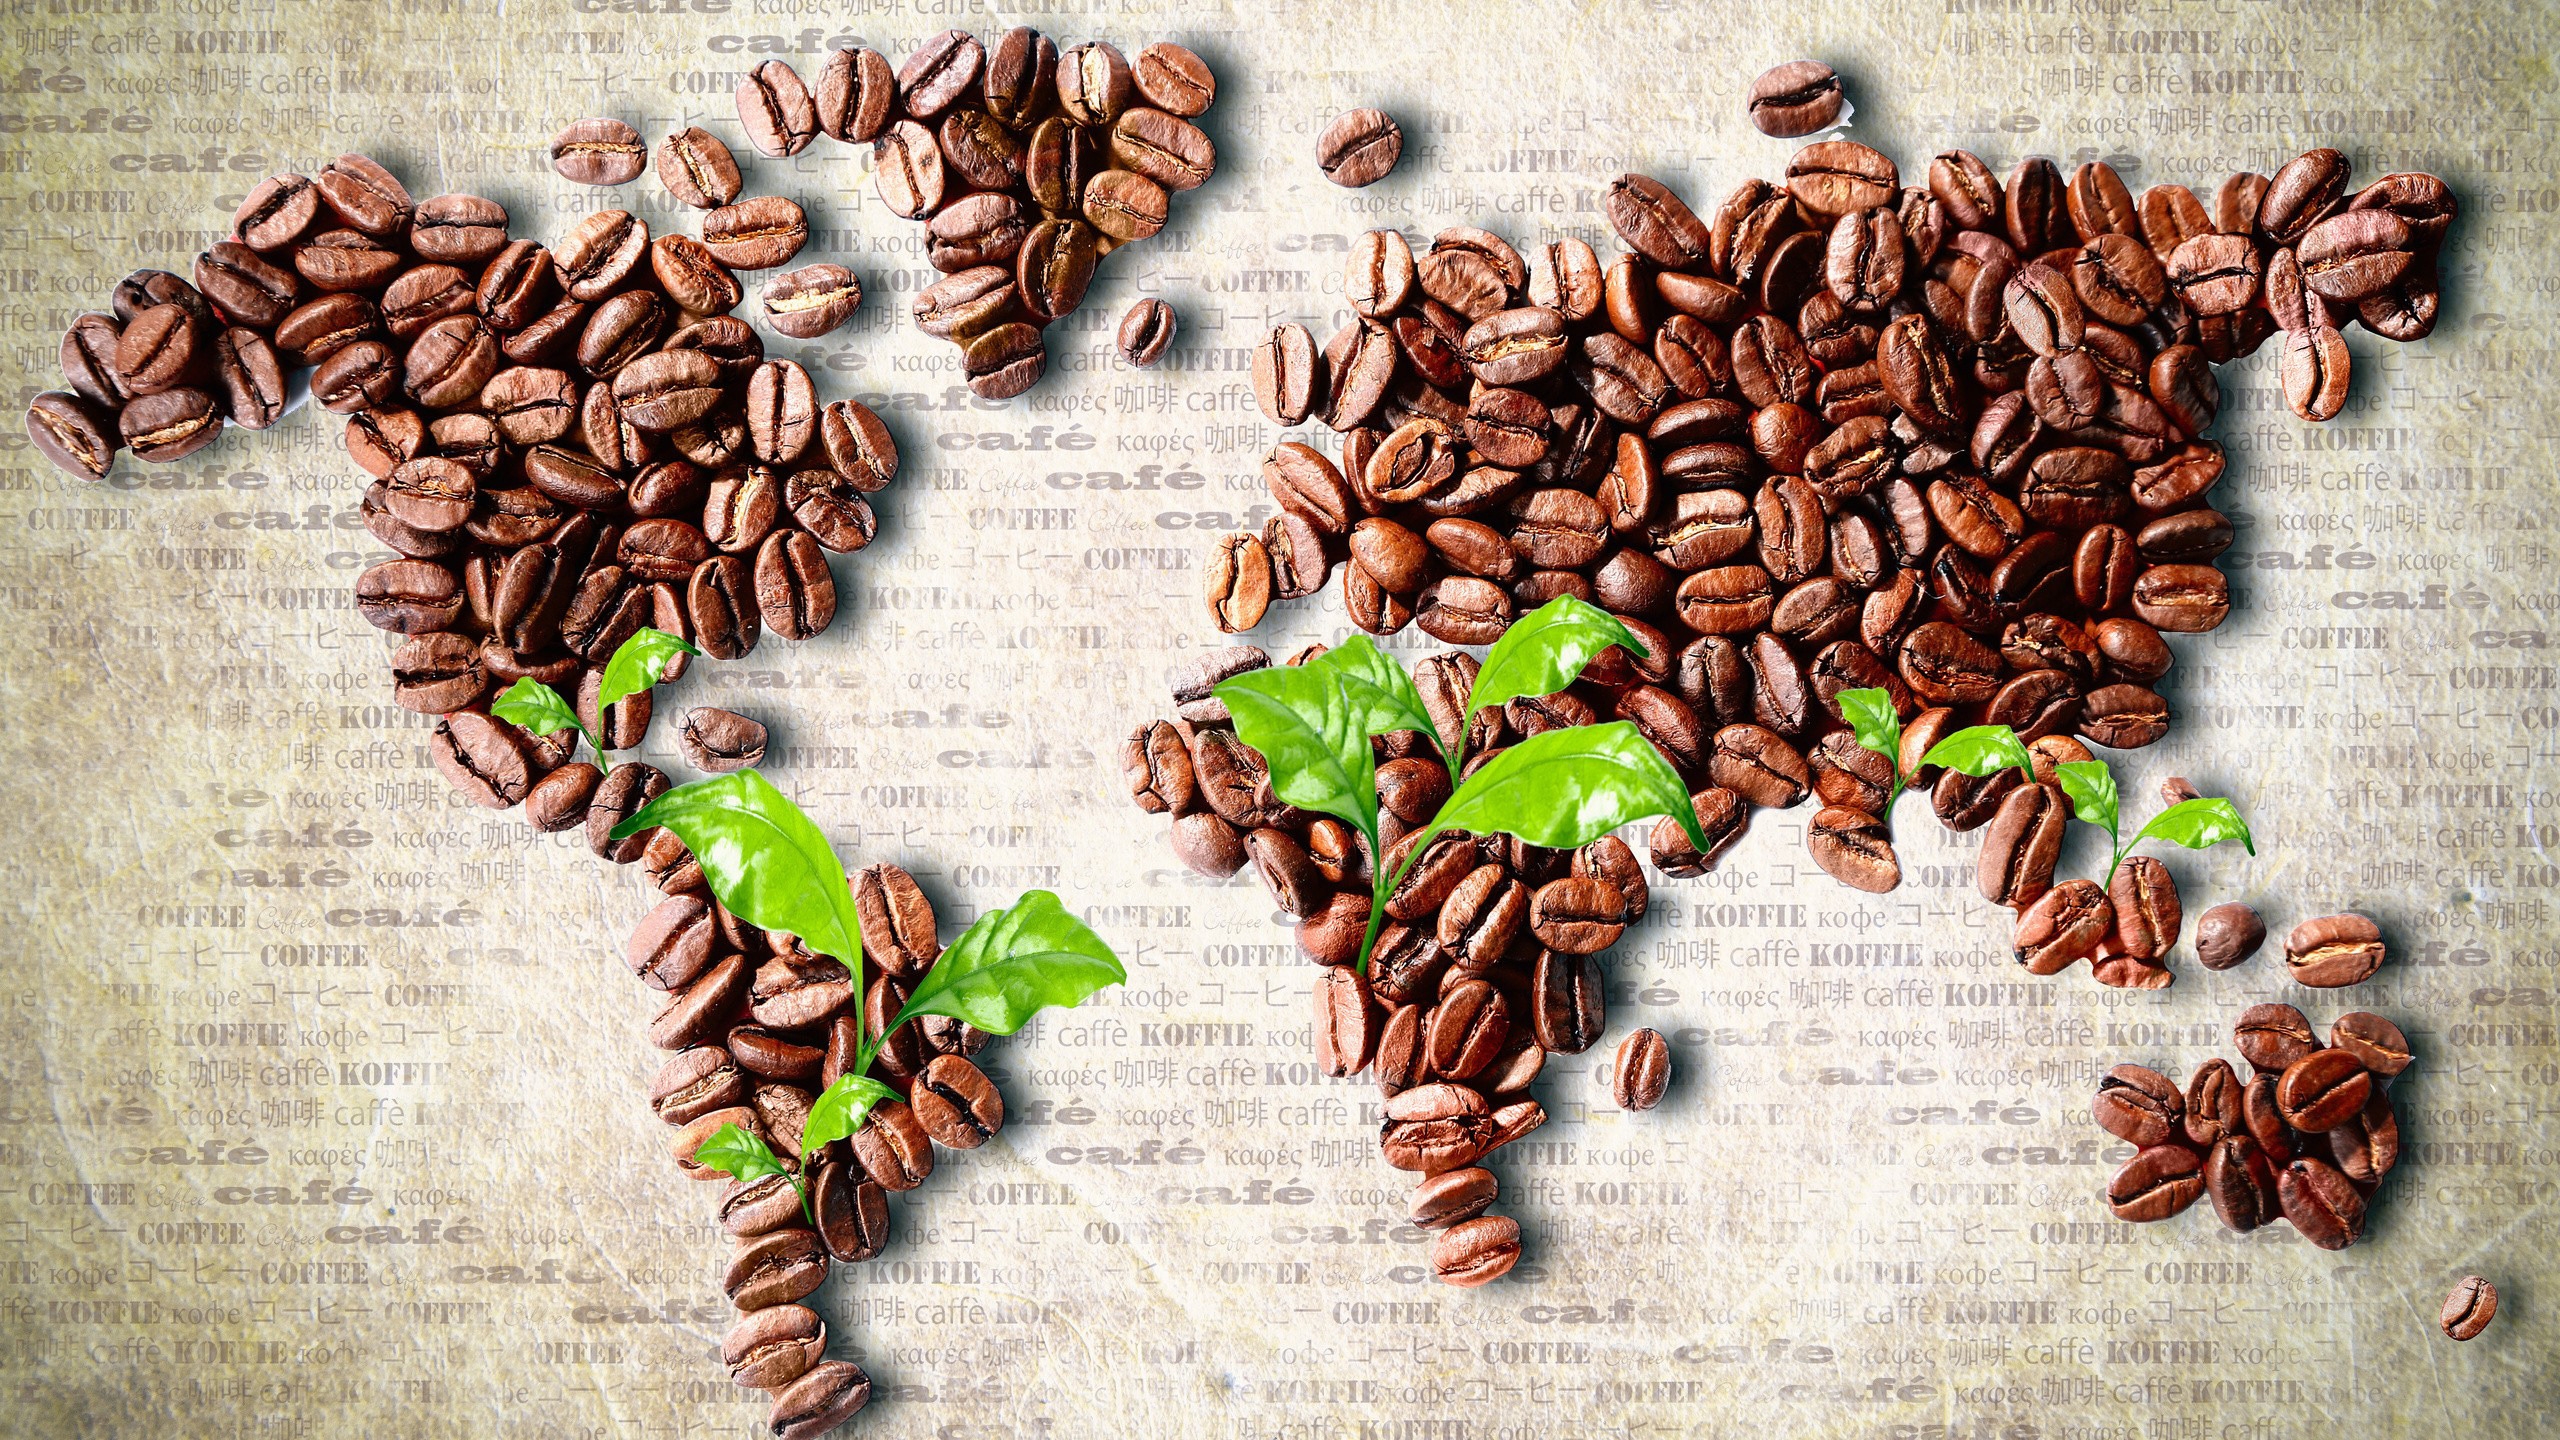 Coffee Beans World Map for 2560x1440 HDTV resolution